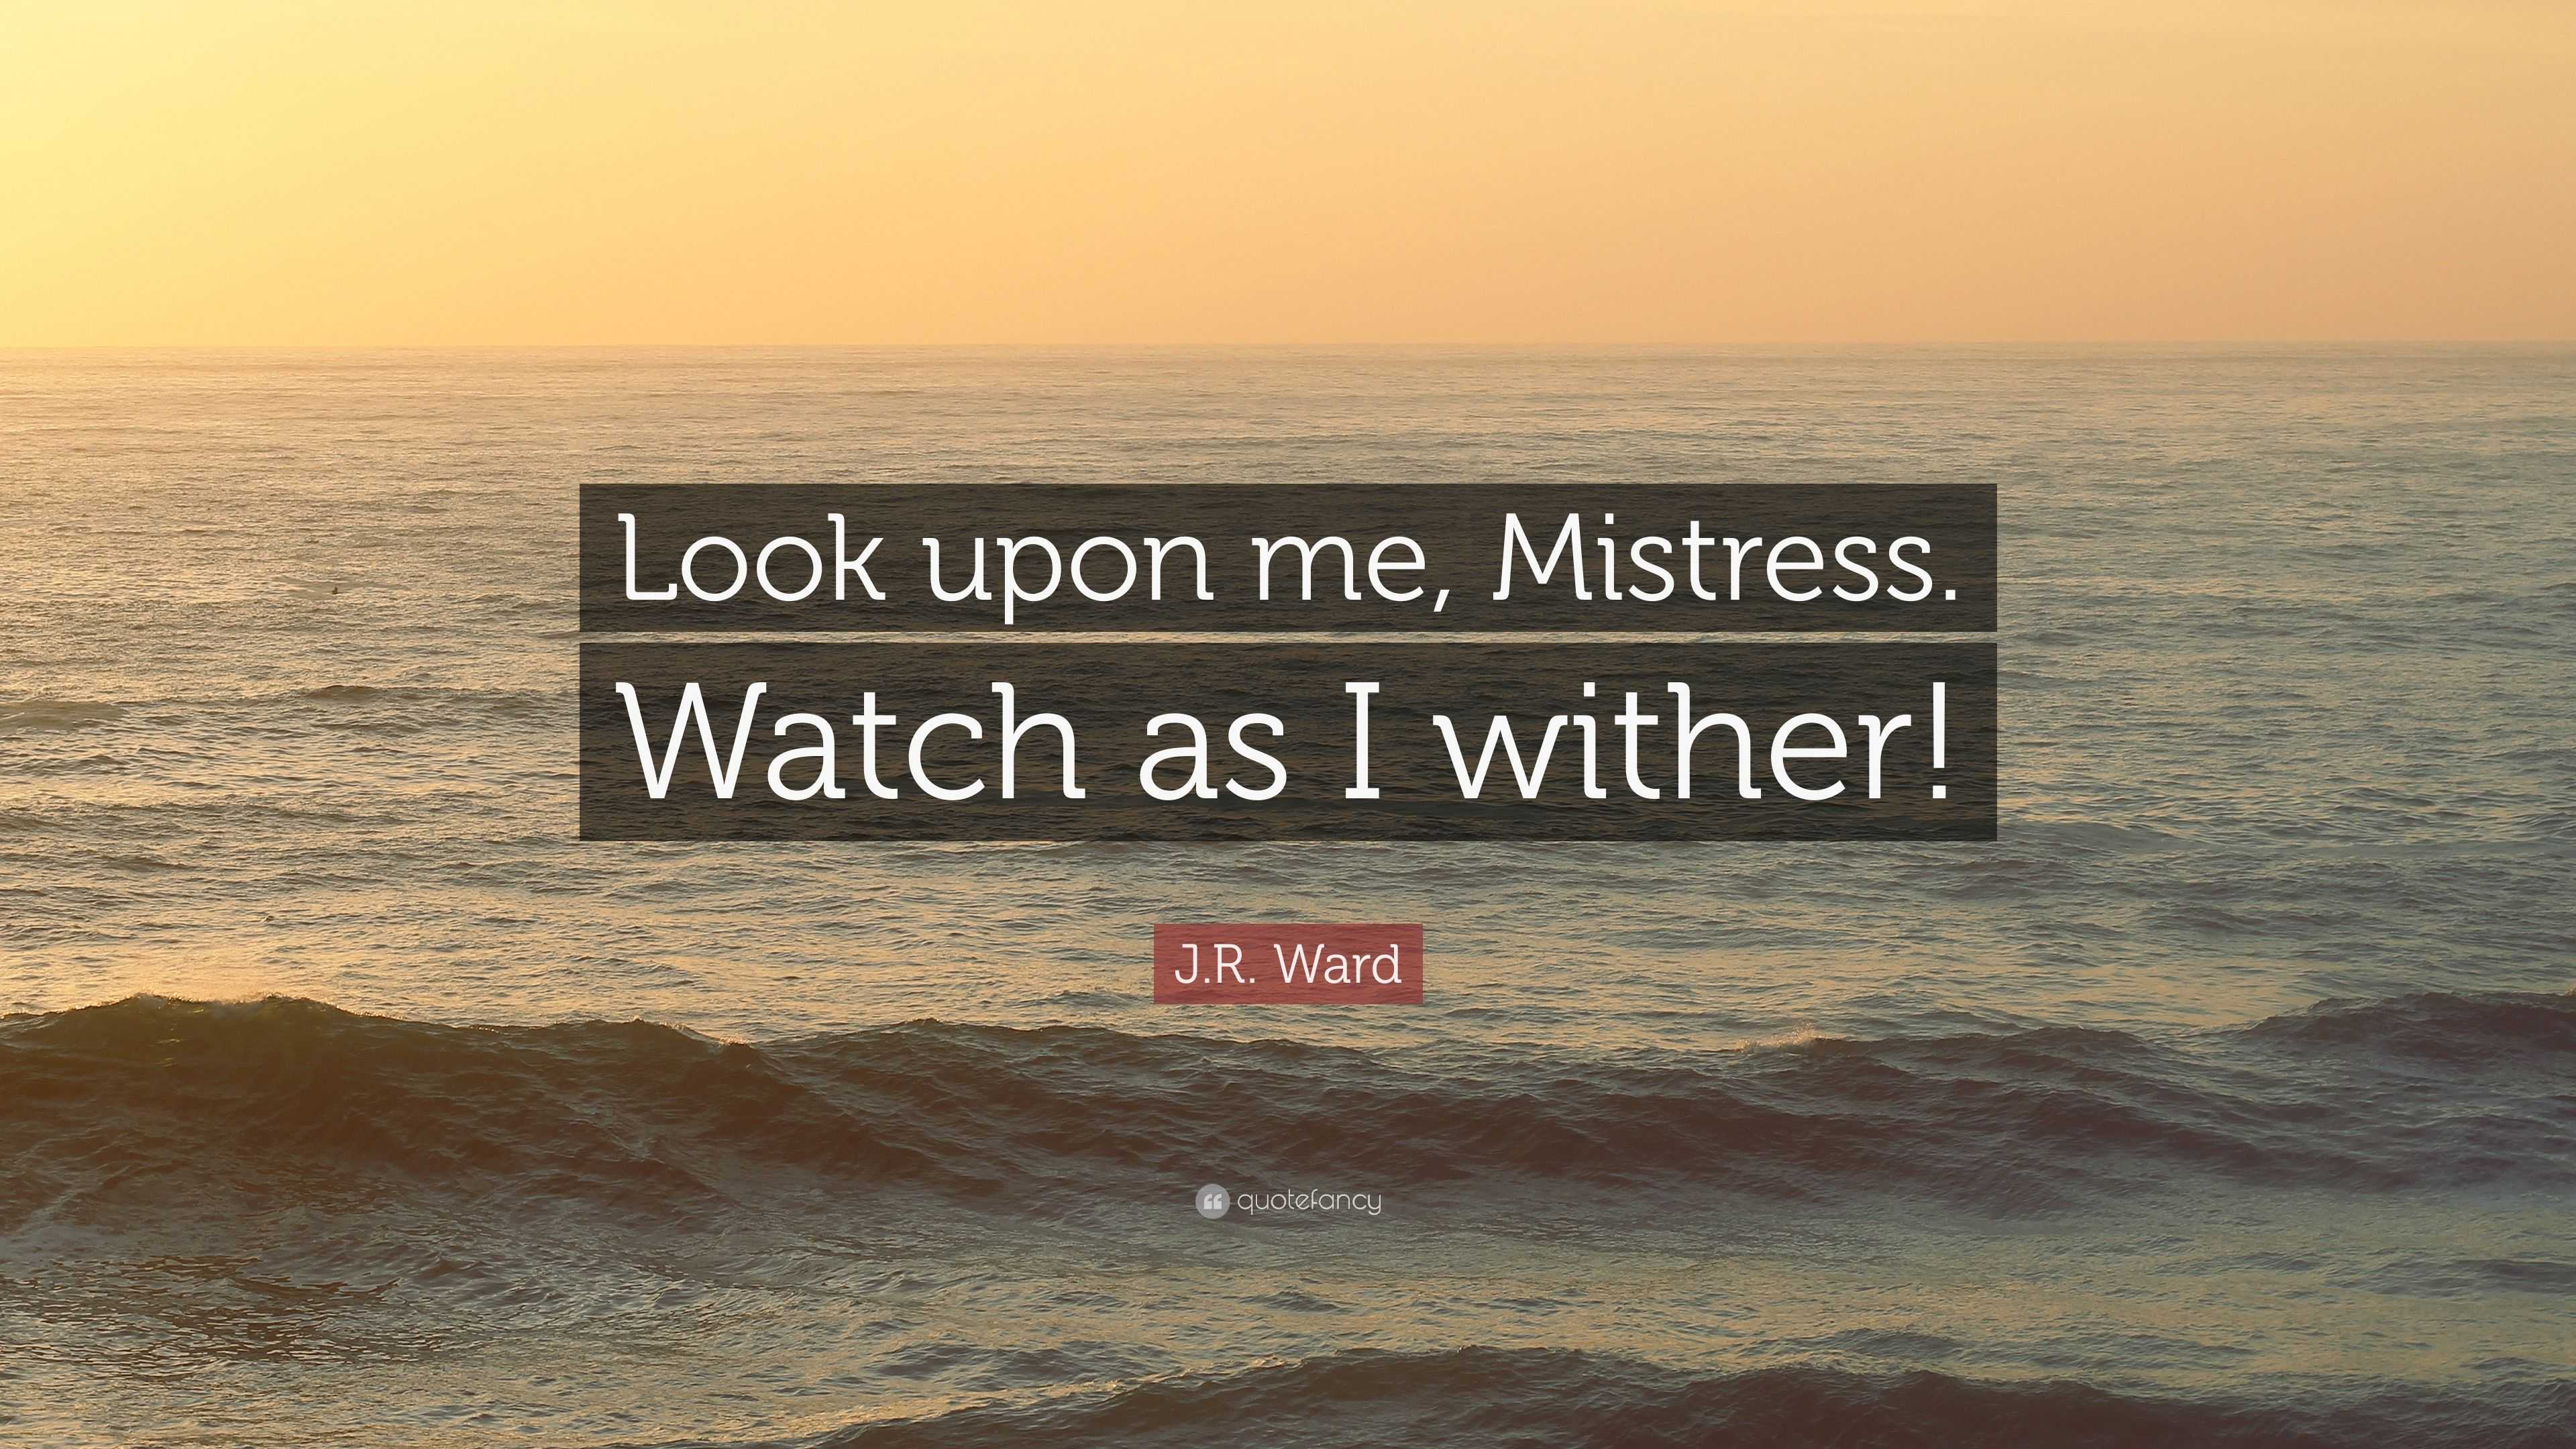 J R Ward Quote Look Upon Me Mistress Watch As I Wither